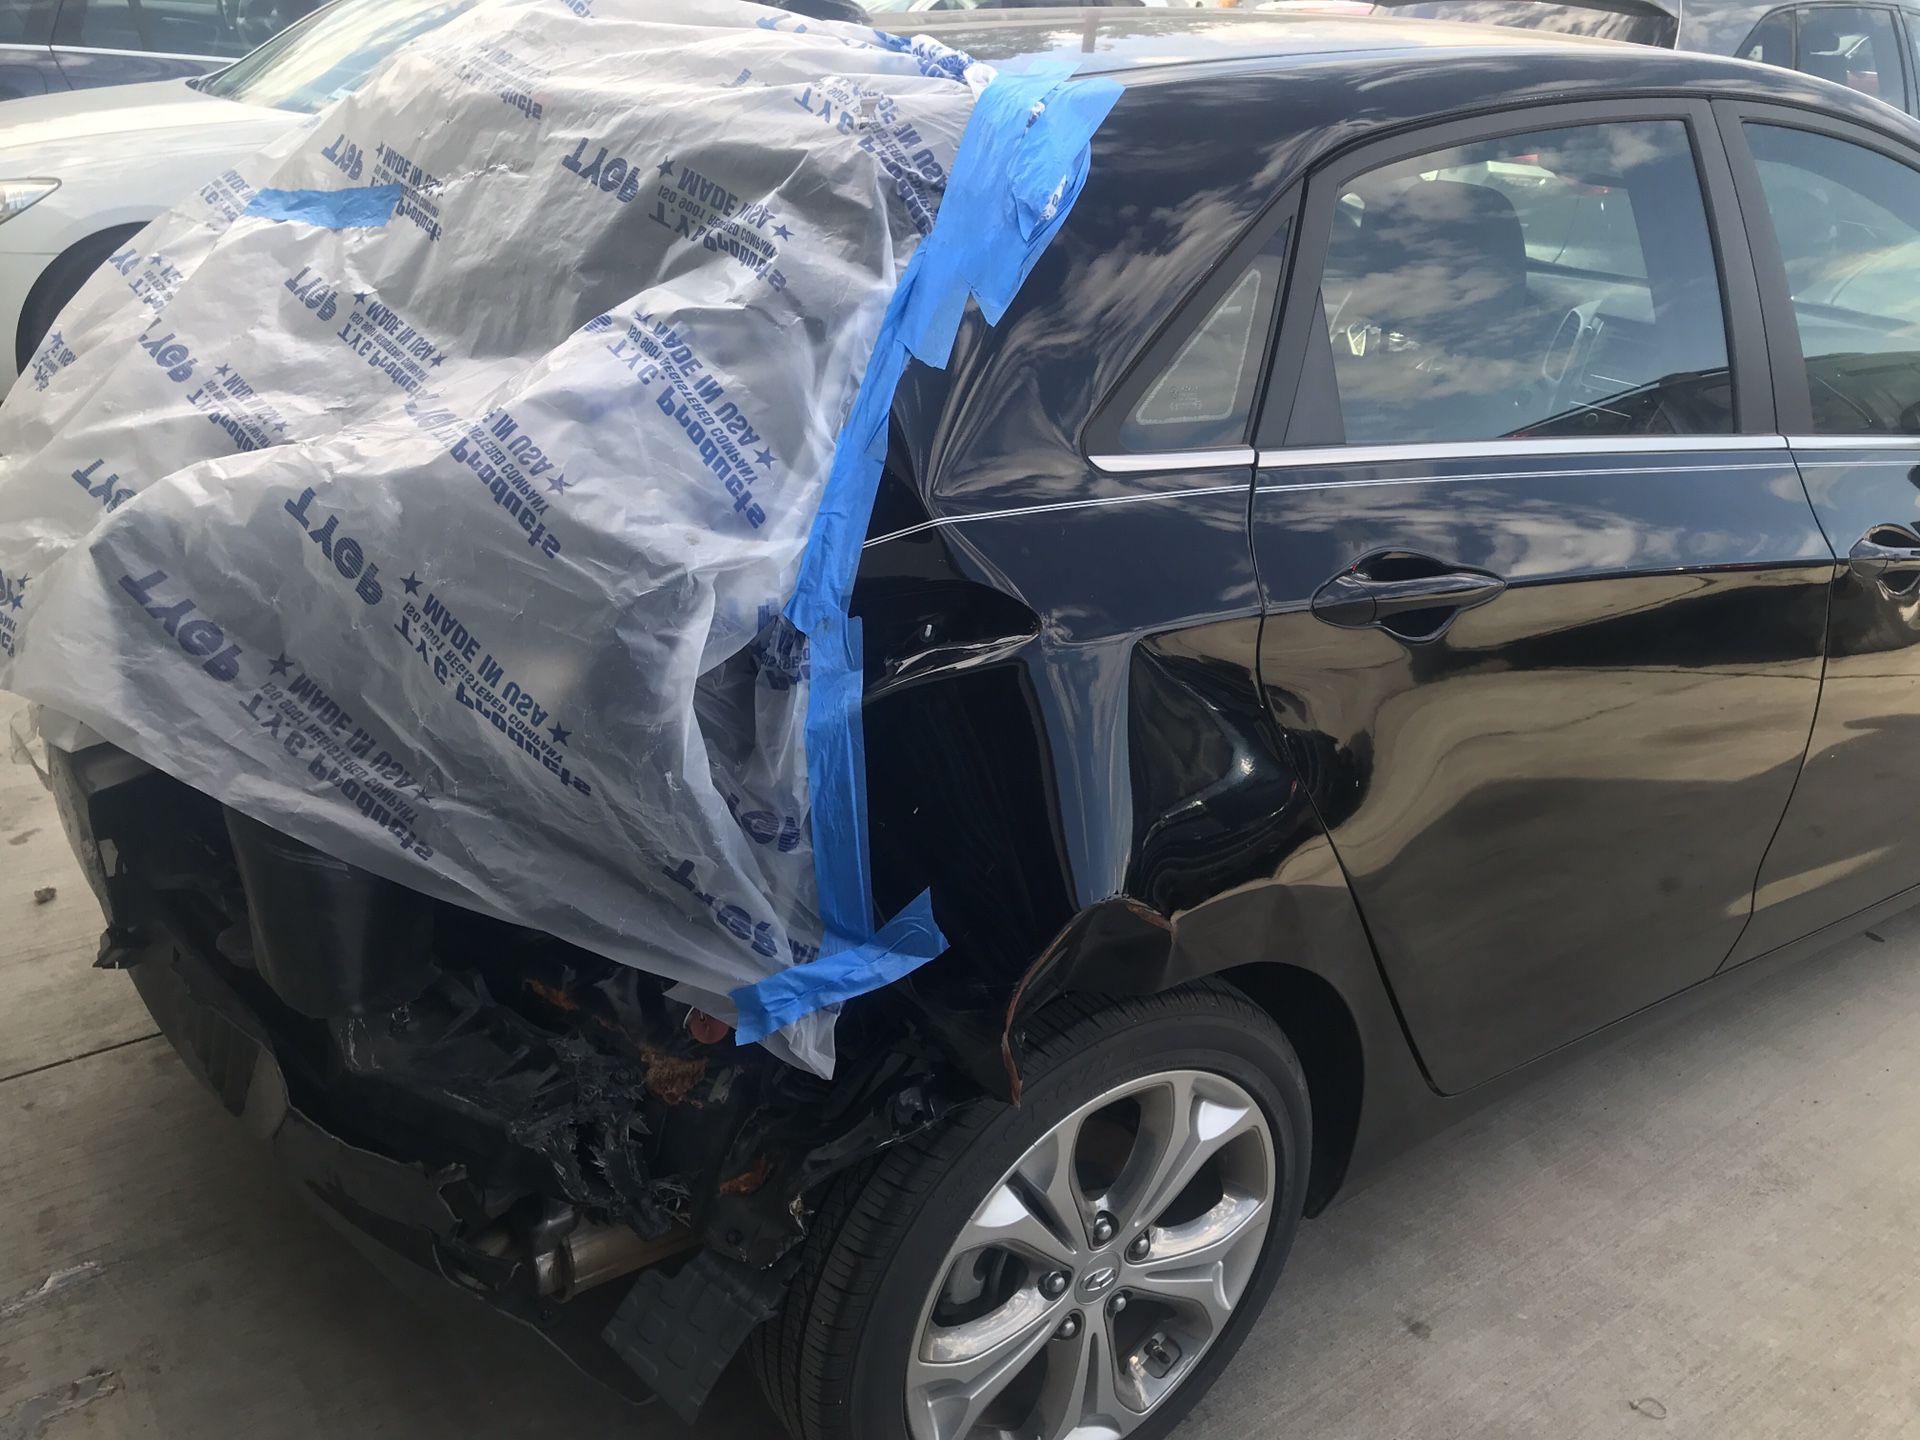 2014 and 2013 Hyundai Elantra GT and Ford Fiesta for parts